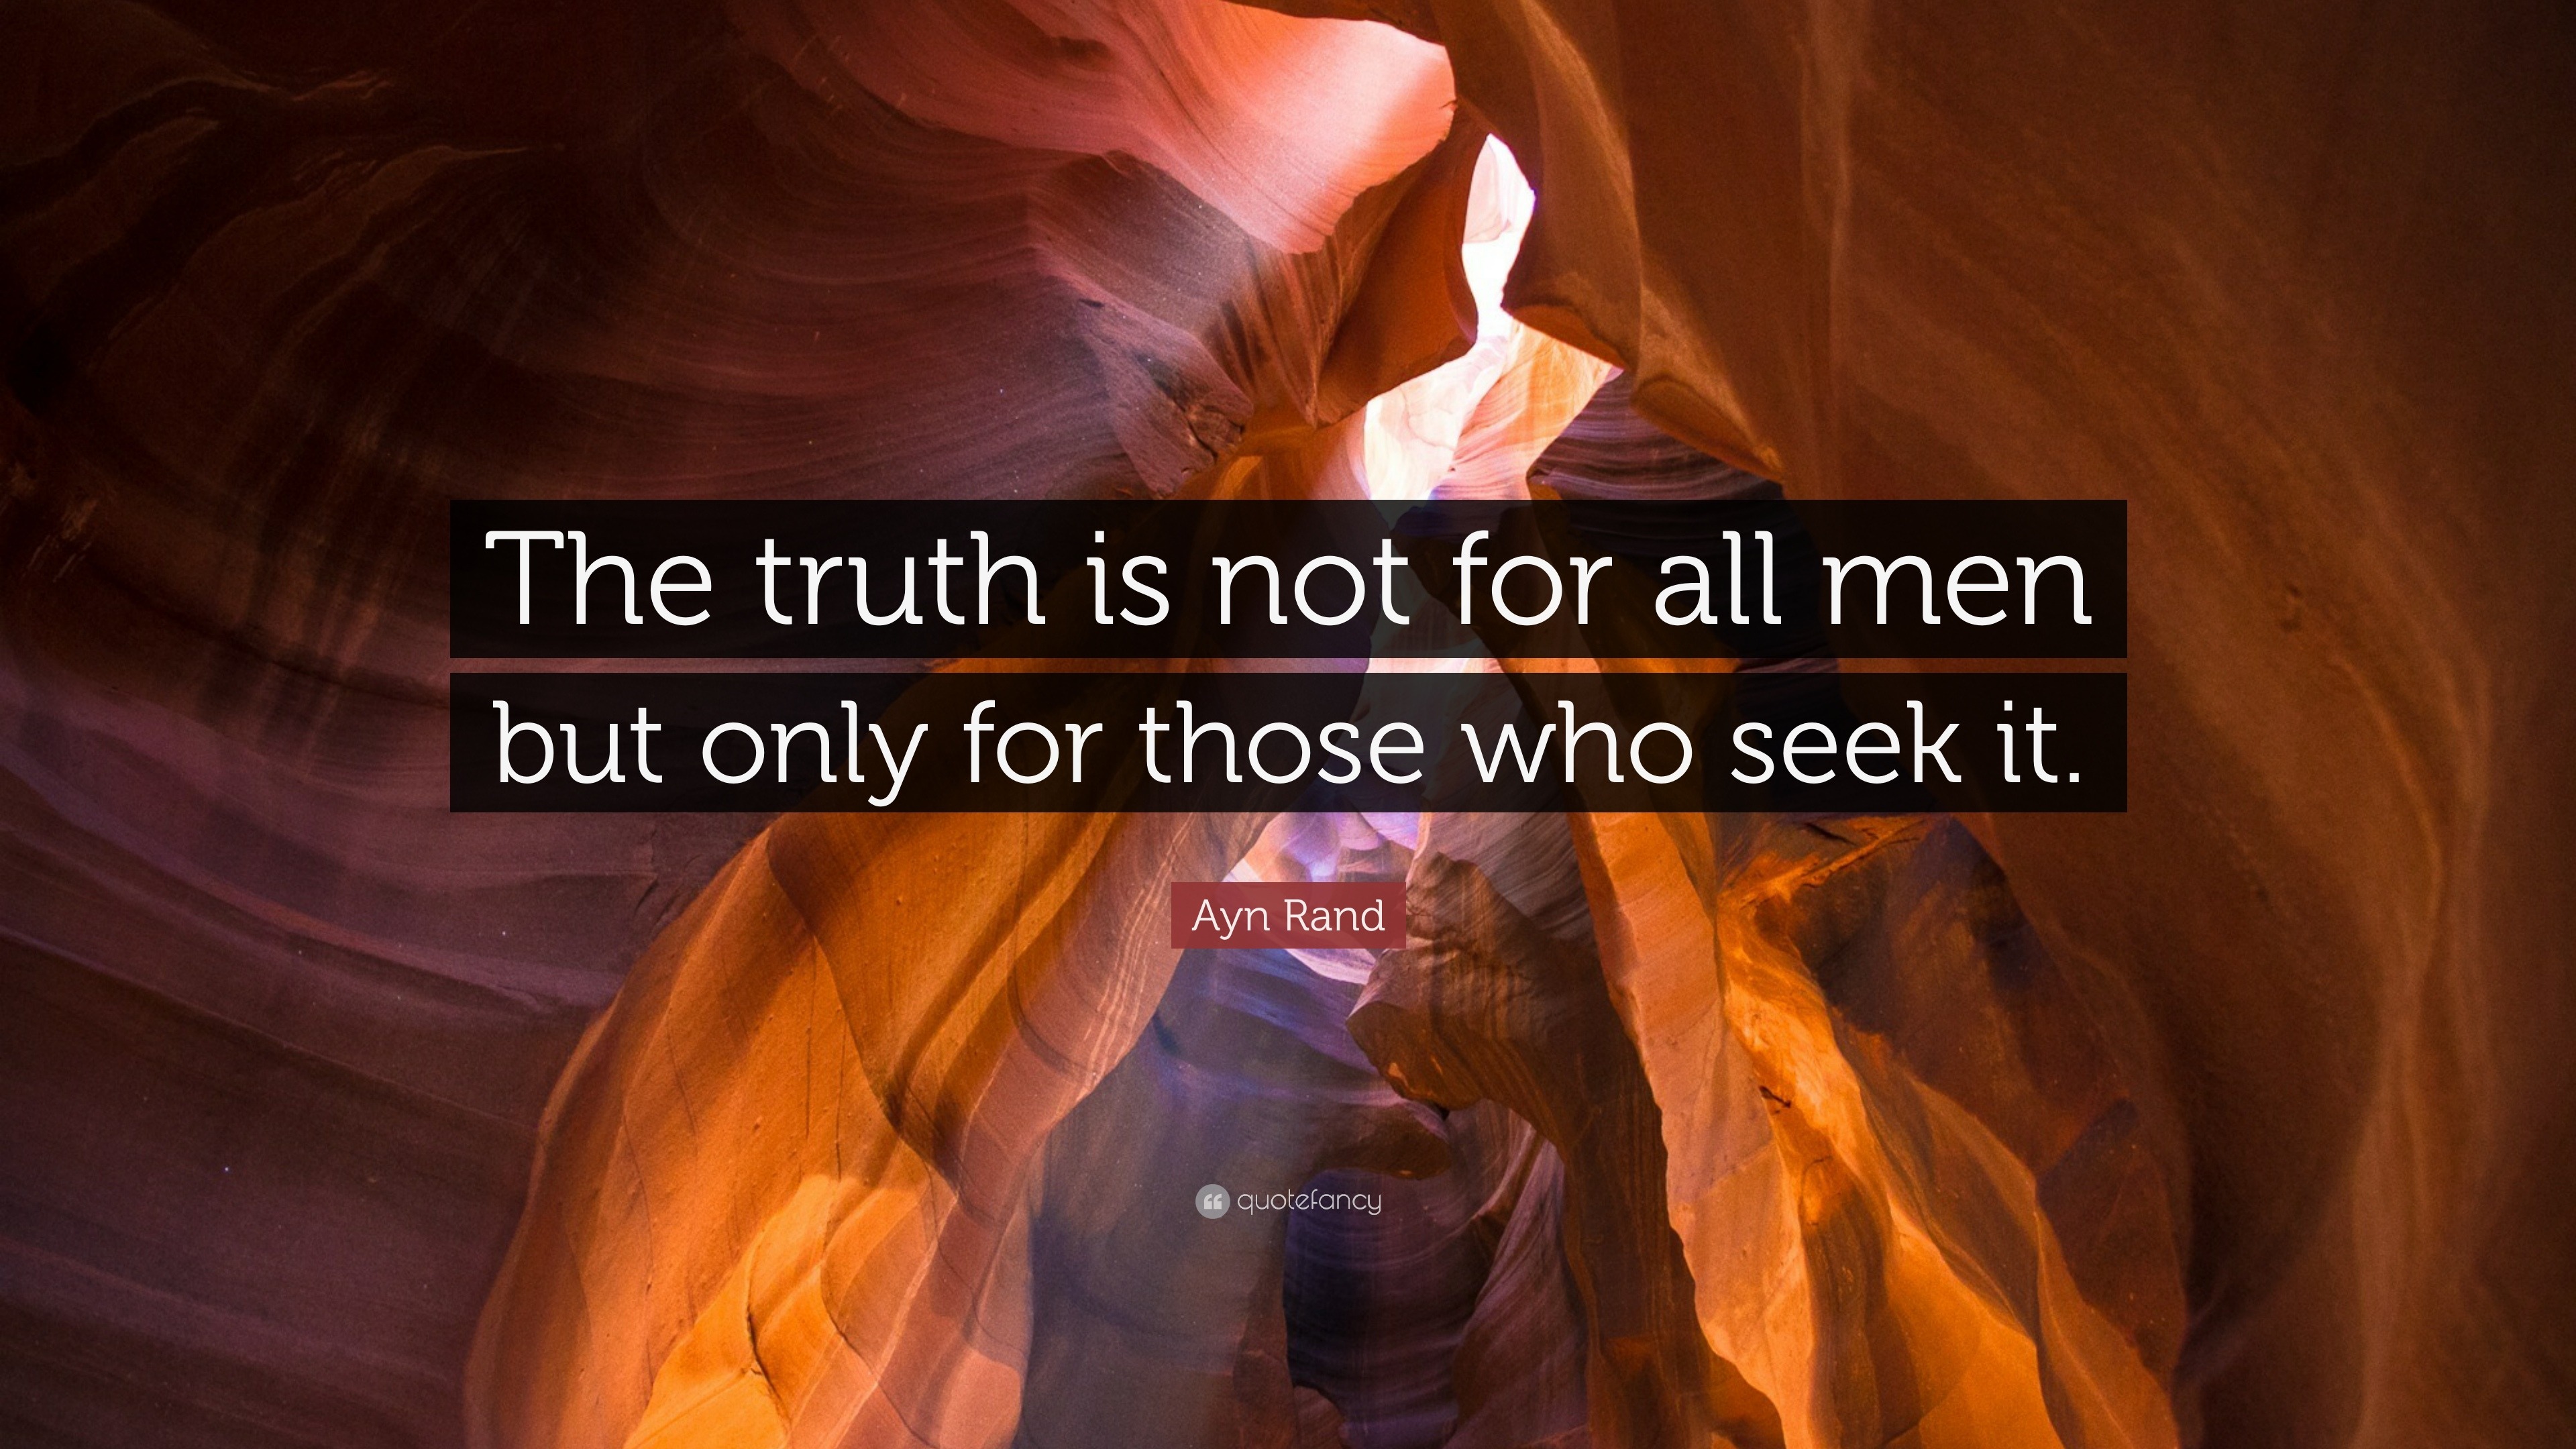 Ayn Rand Quote: “The truth is not for all men but only for those who ...